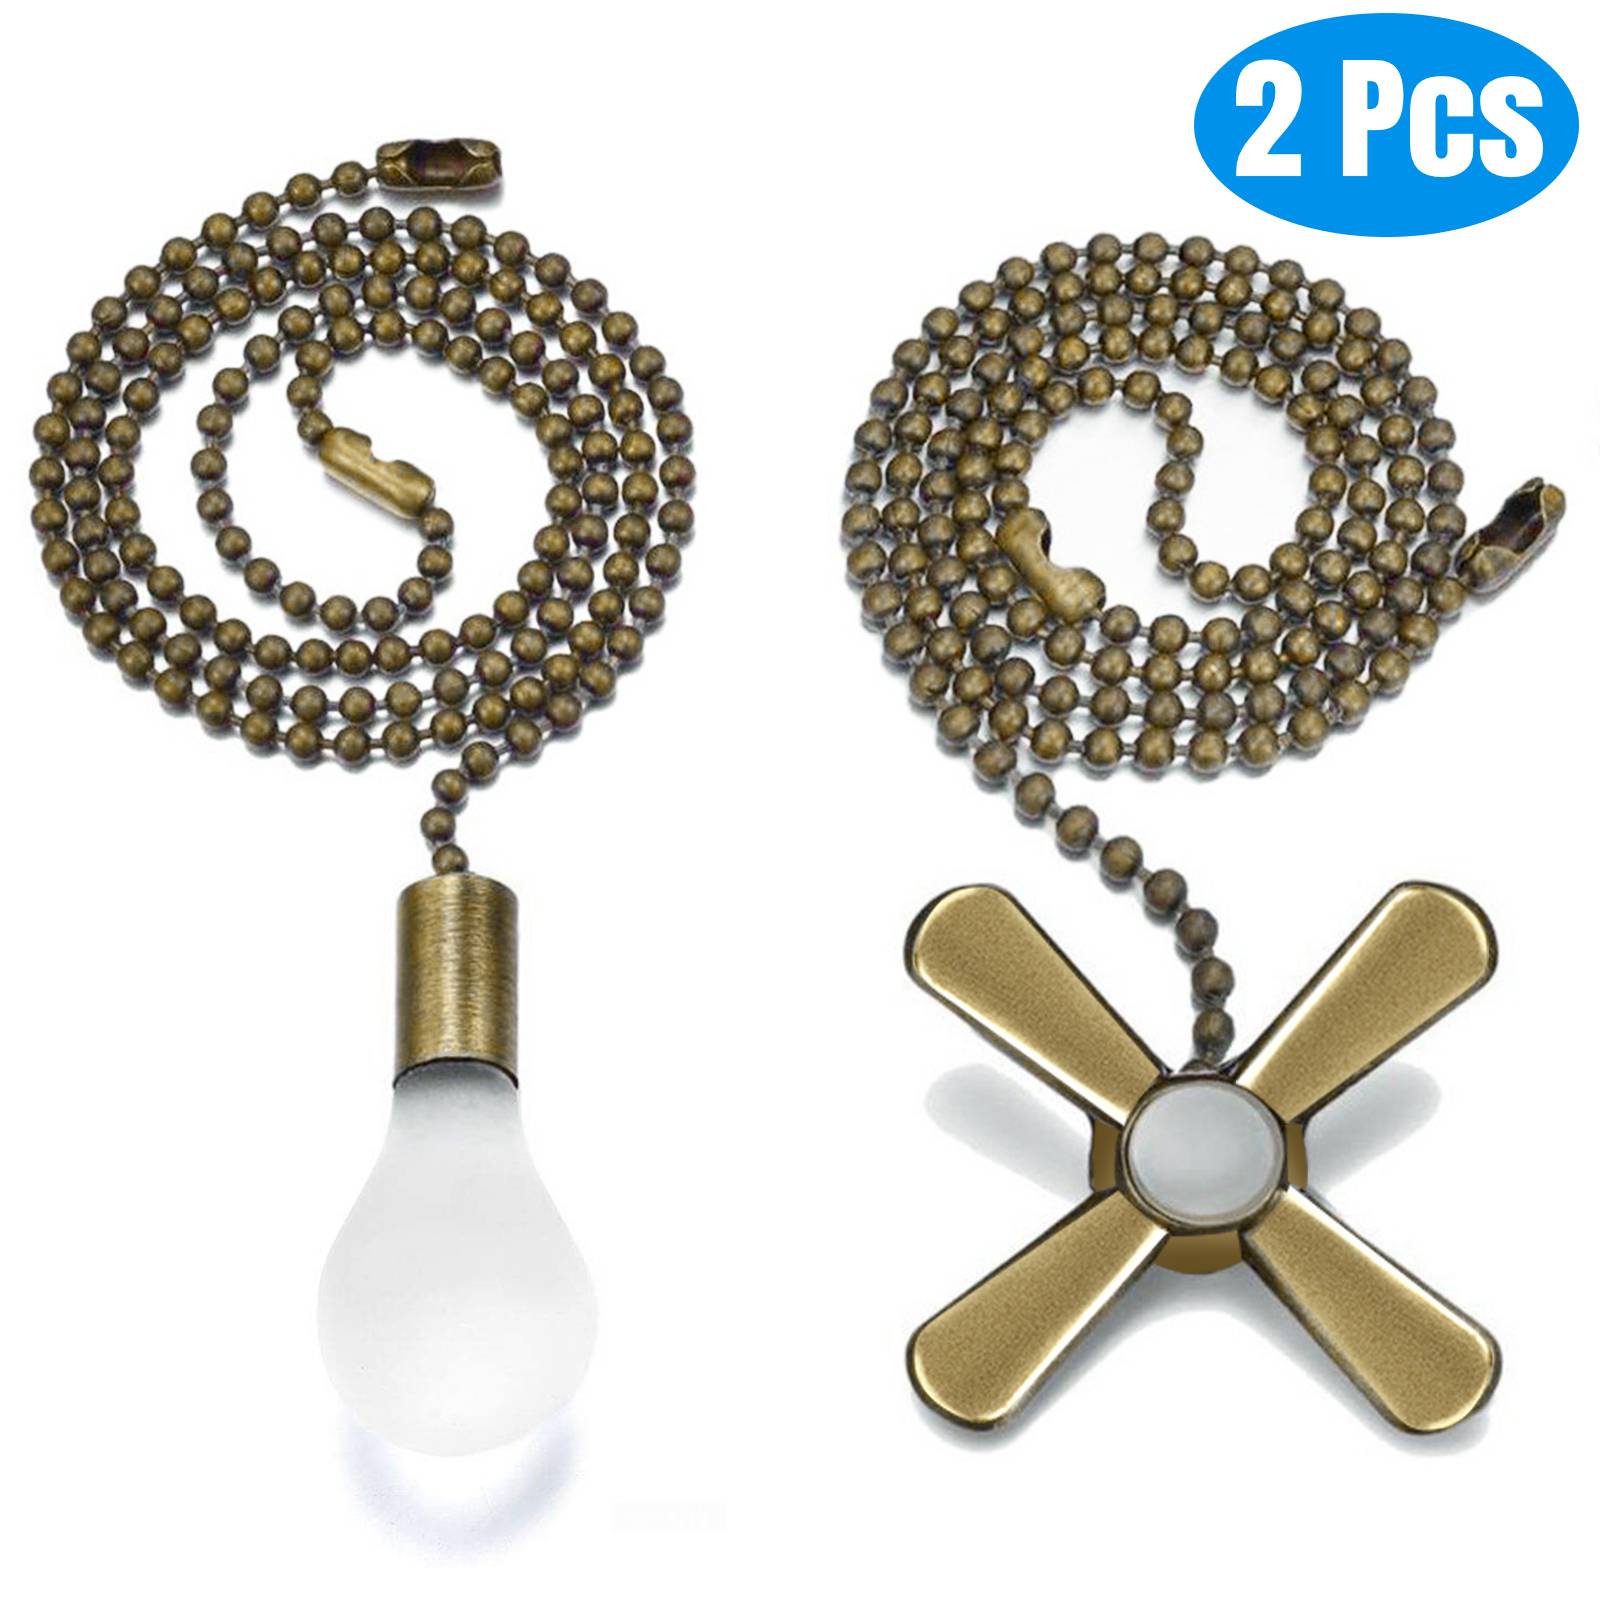 WHOLESALE LOT 25 ADAPTER TO MAKE FAN AND LIGHT PULLS BEADED CHAIN 18" LONG BRASS 